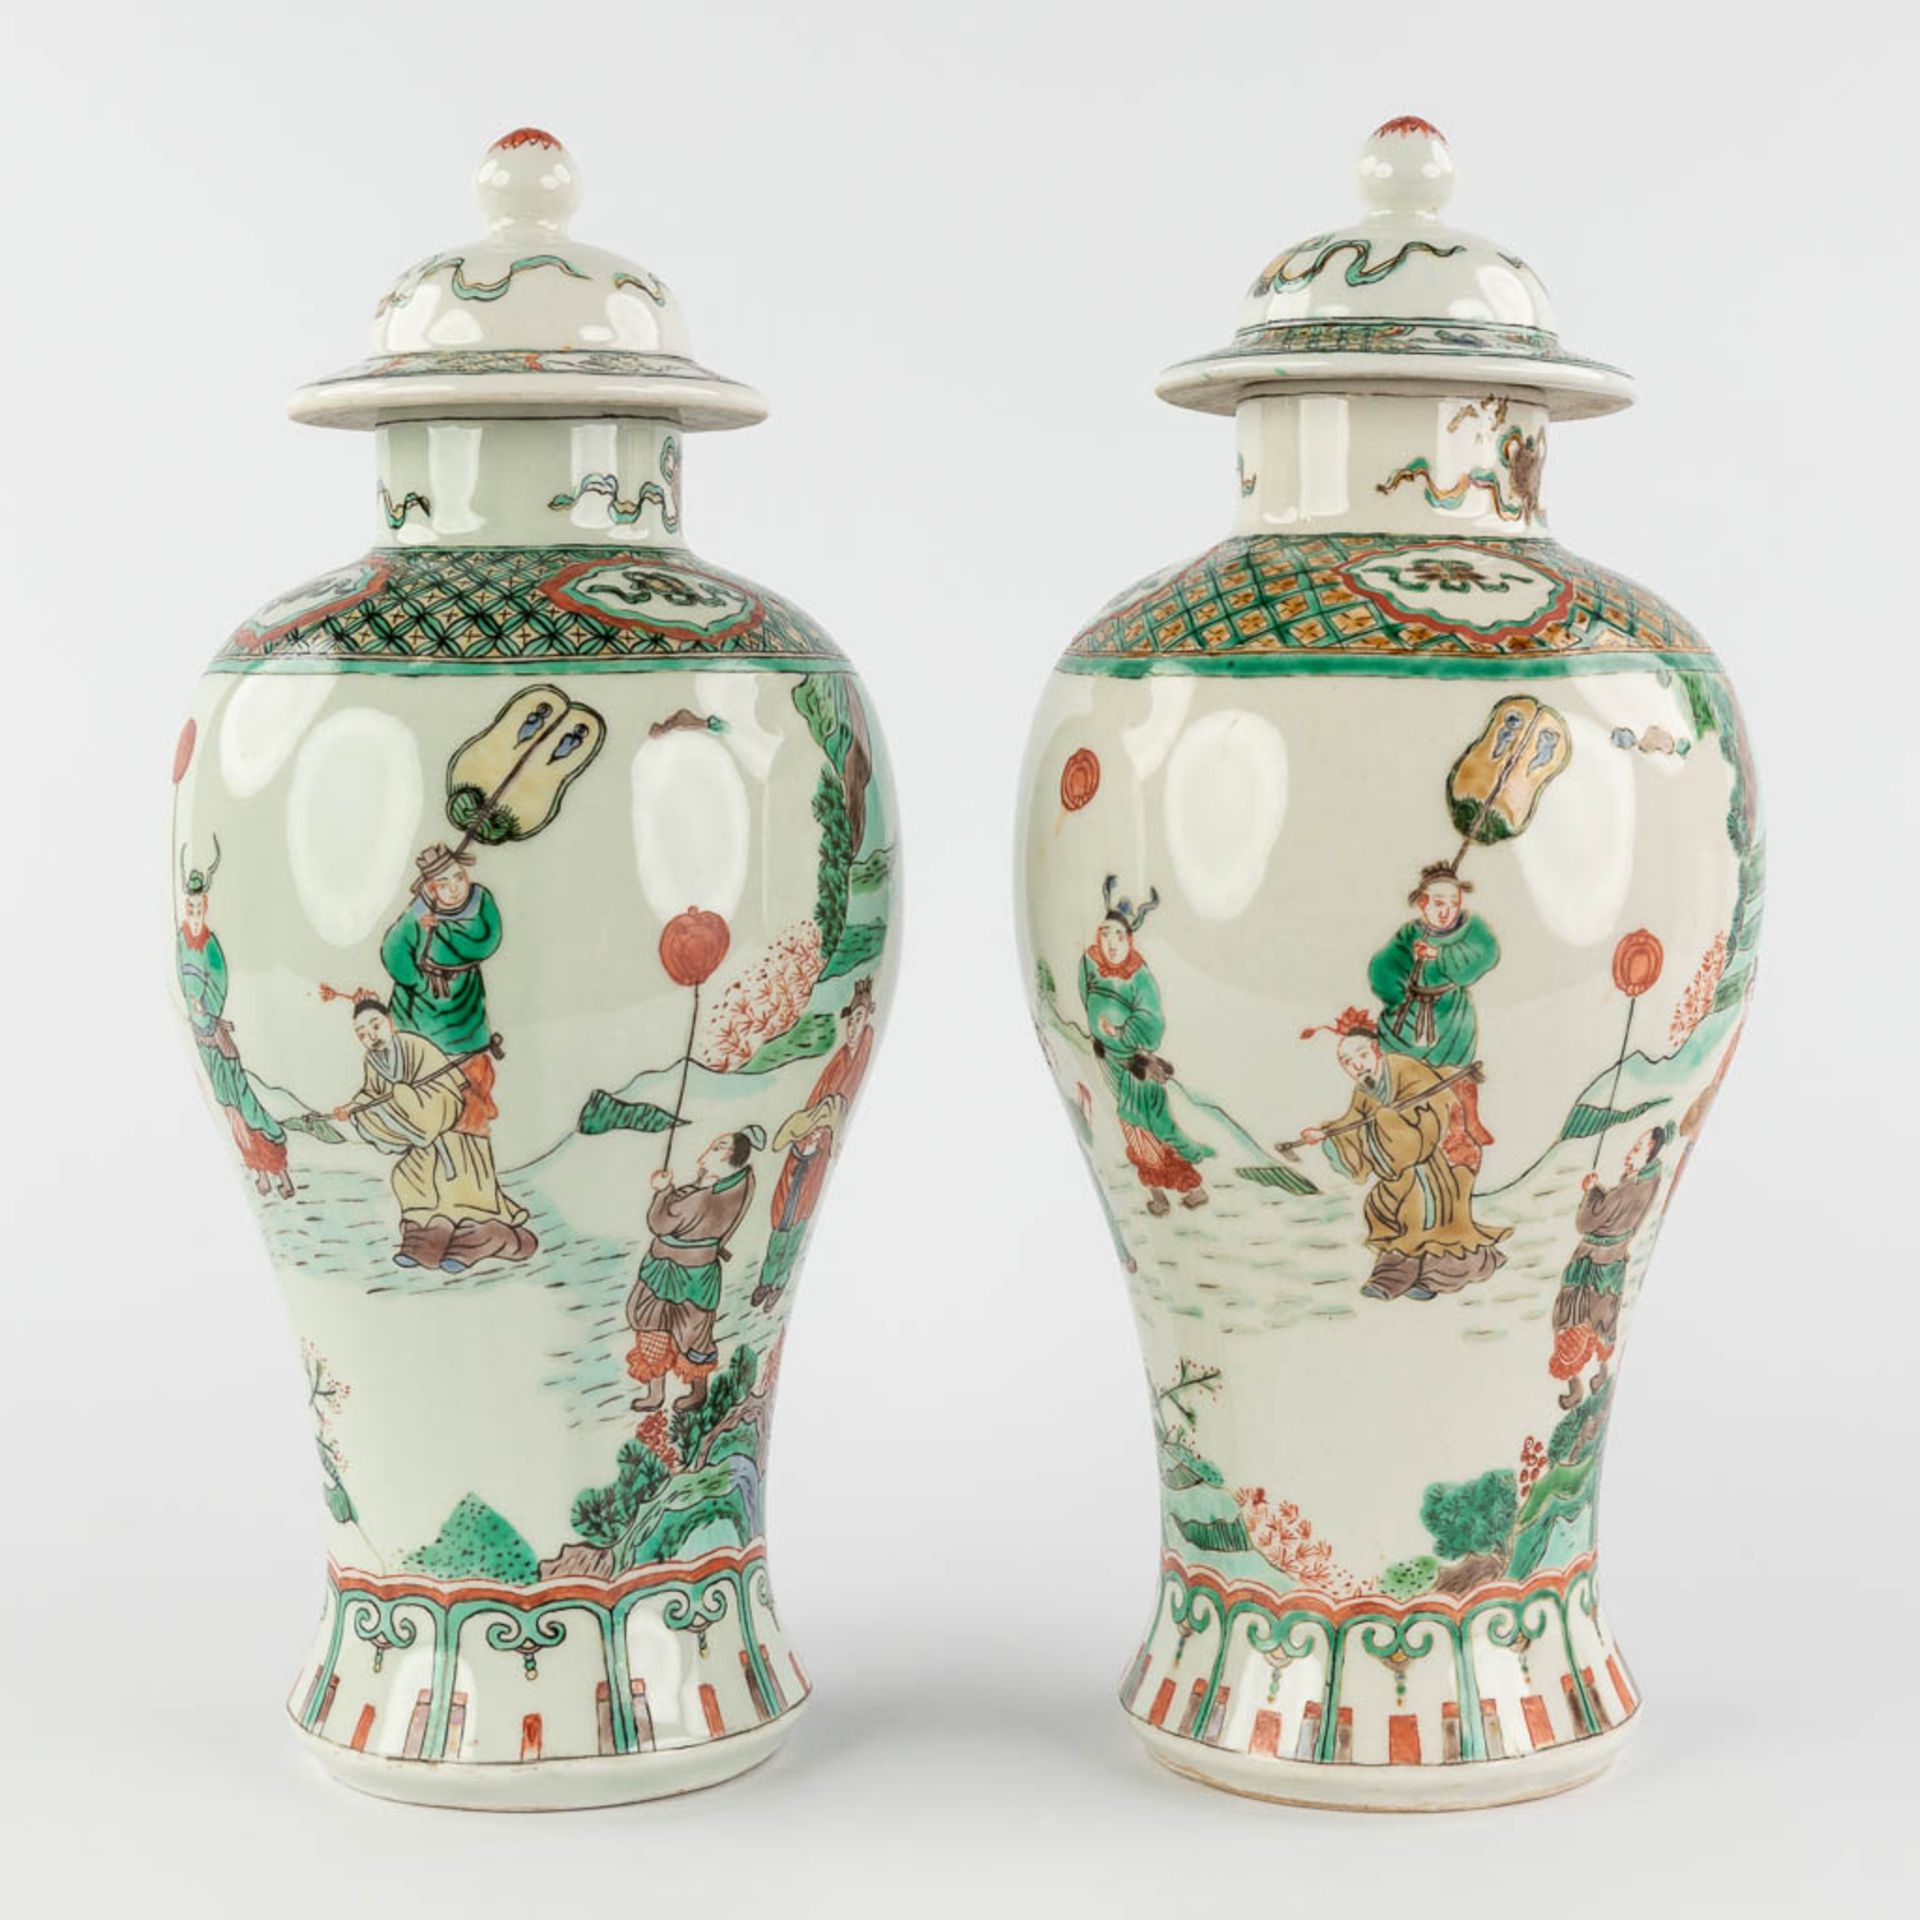 A pair of Chinese Famille Verte with farmers and symbols of happiness. 19th/20th C. (H:29 x D:13 cm) - Image 4 of 14